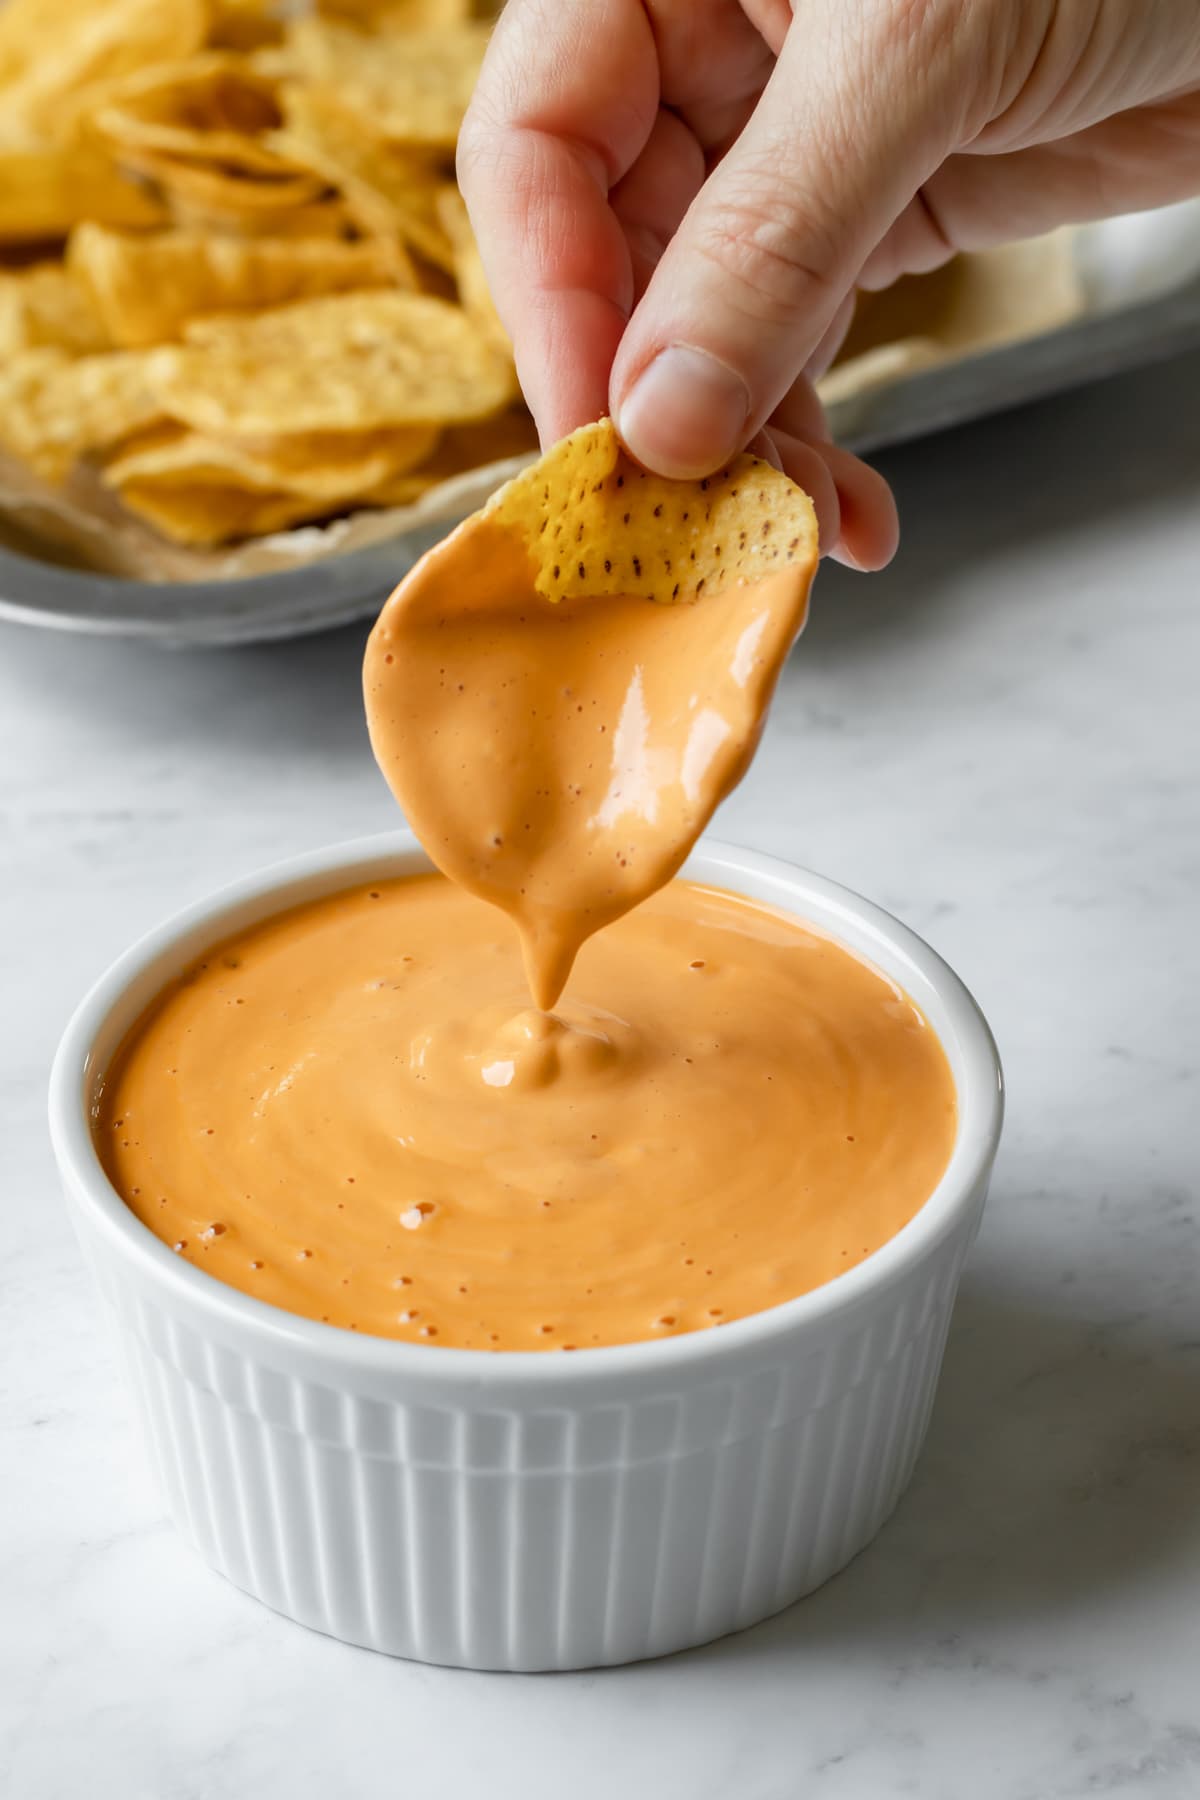 A hand dipping a tortilla chip in a small bowl of cheesy sauce.